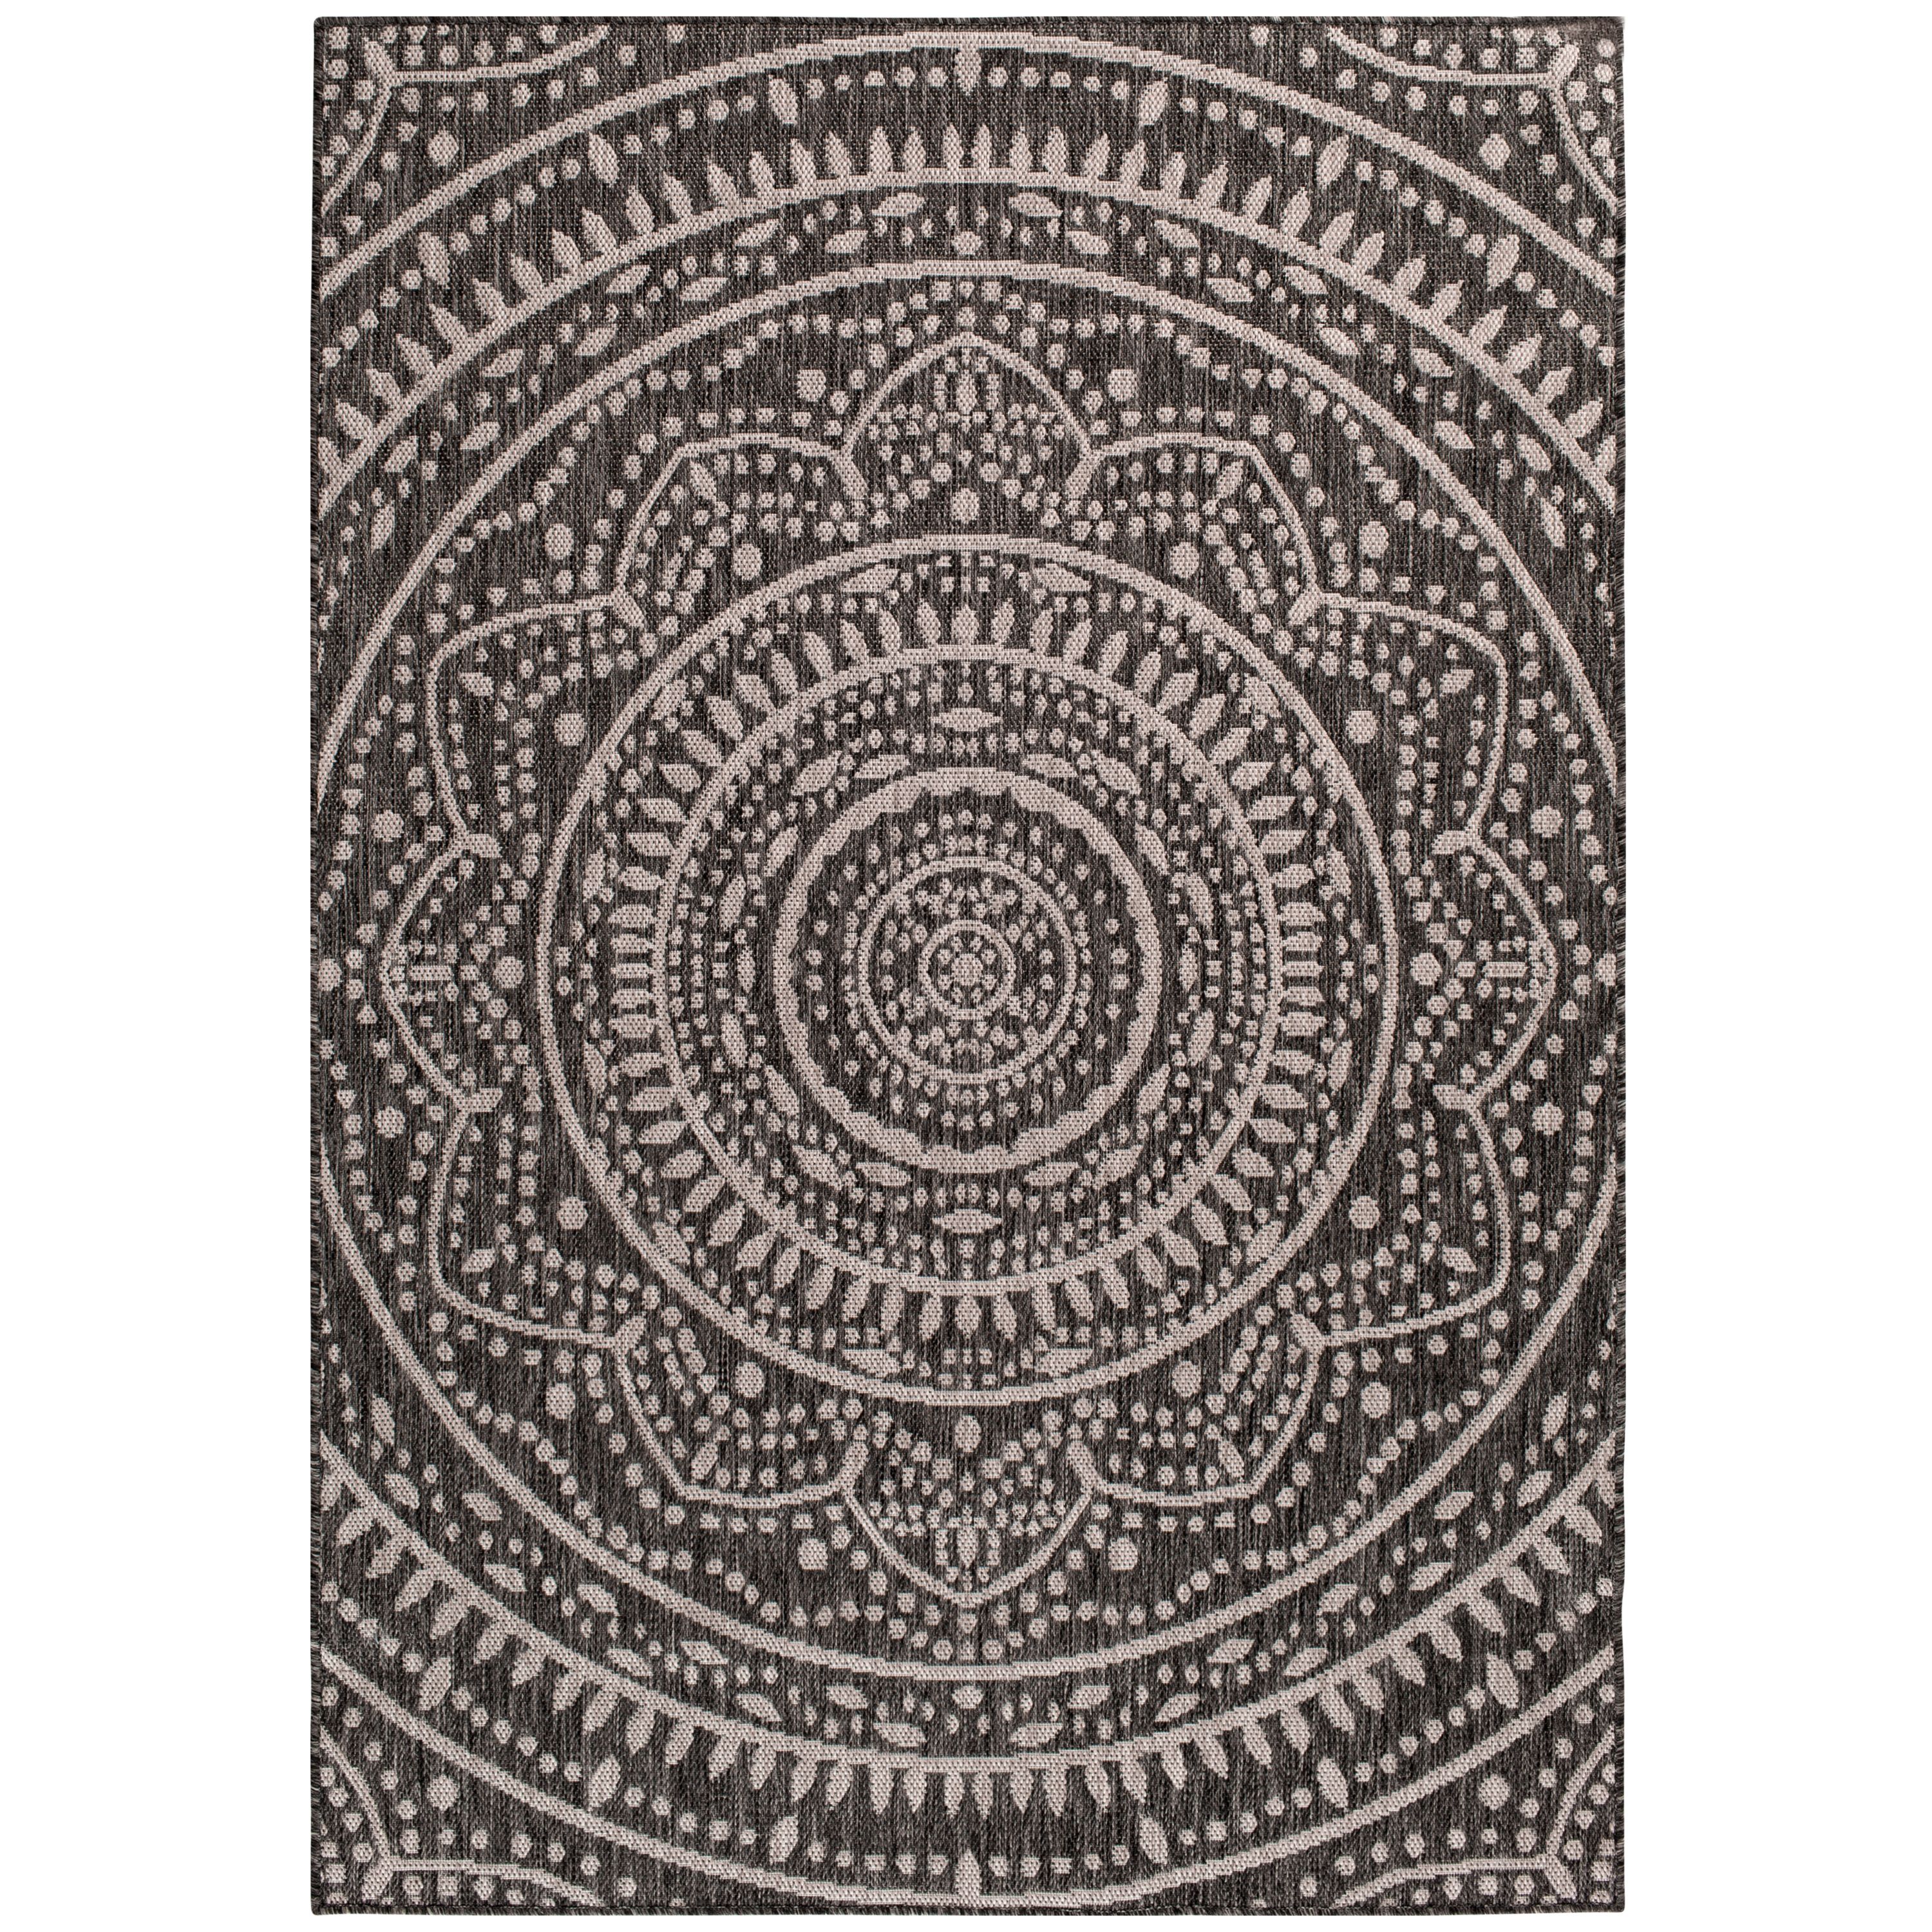 Mainstays 5'x7' Gray Global Medallion Outdoor Area Rug - image 1 of 8